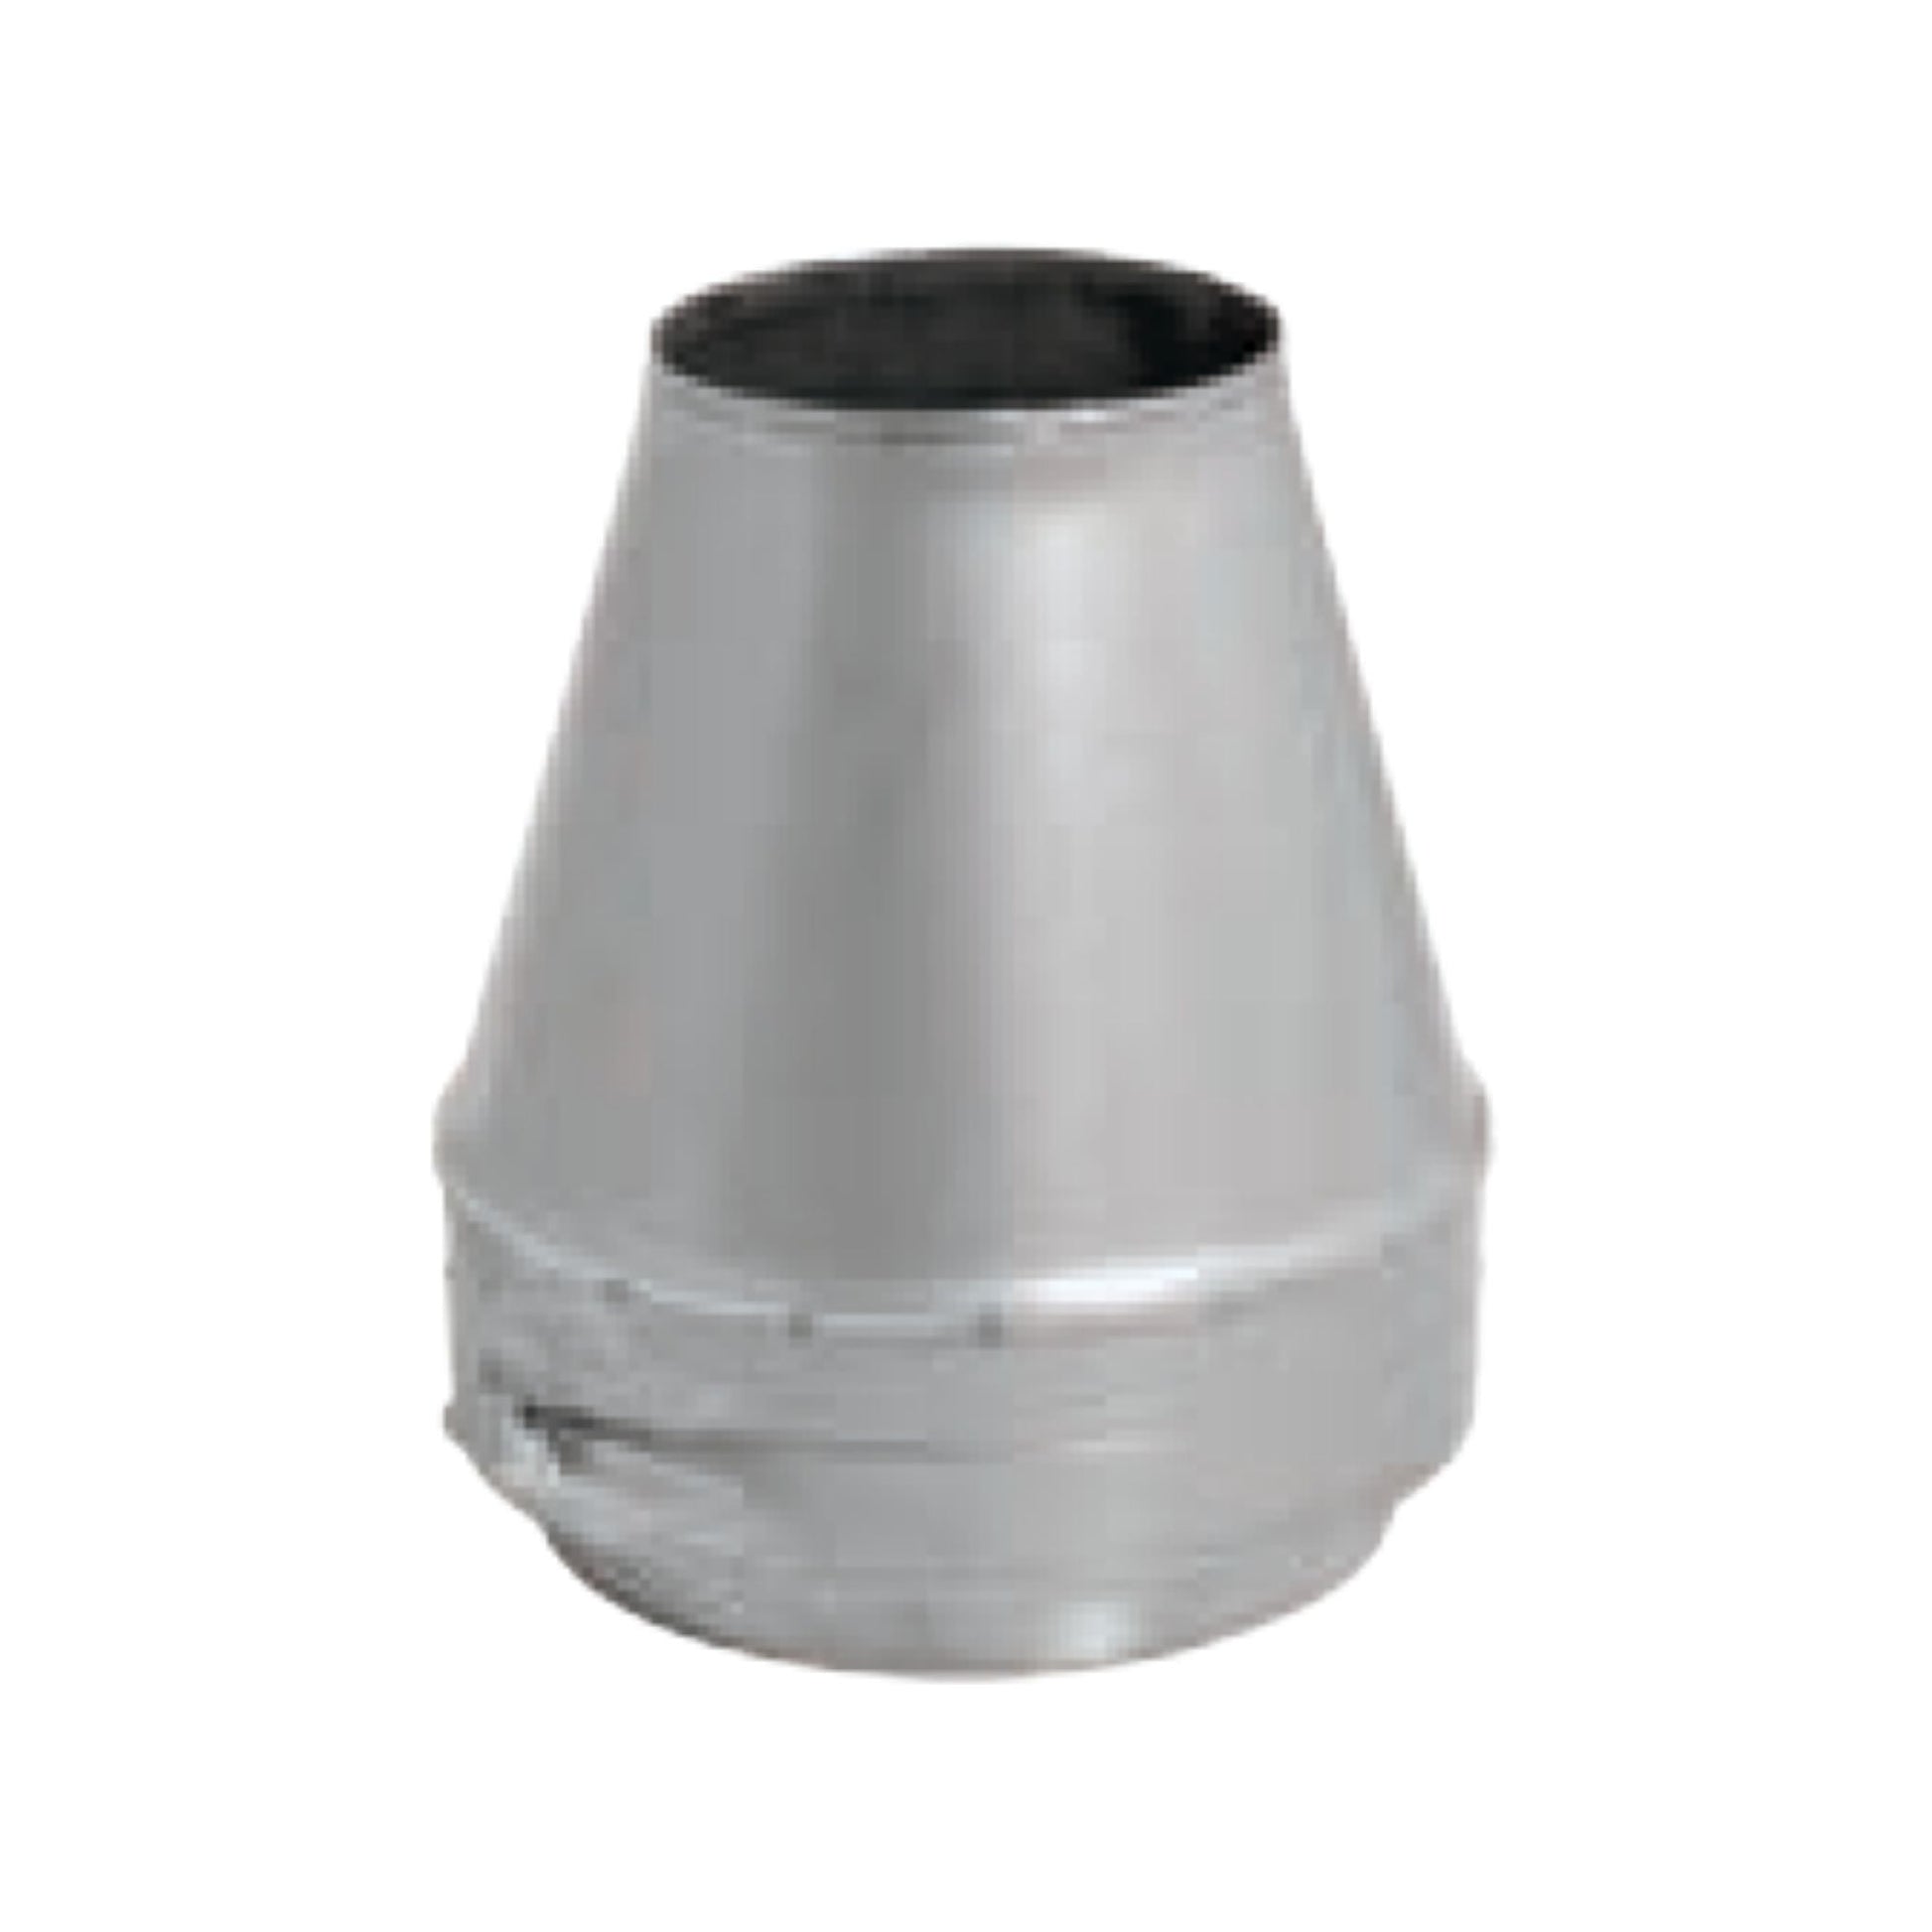 DuraVent FasNSeal W2 9" x 8" 29-4C Stainless Steel Double Wall Termination Cone